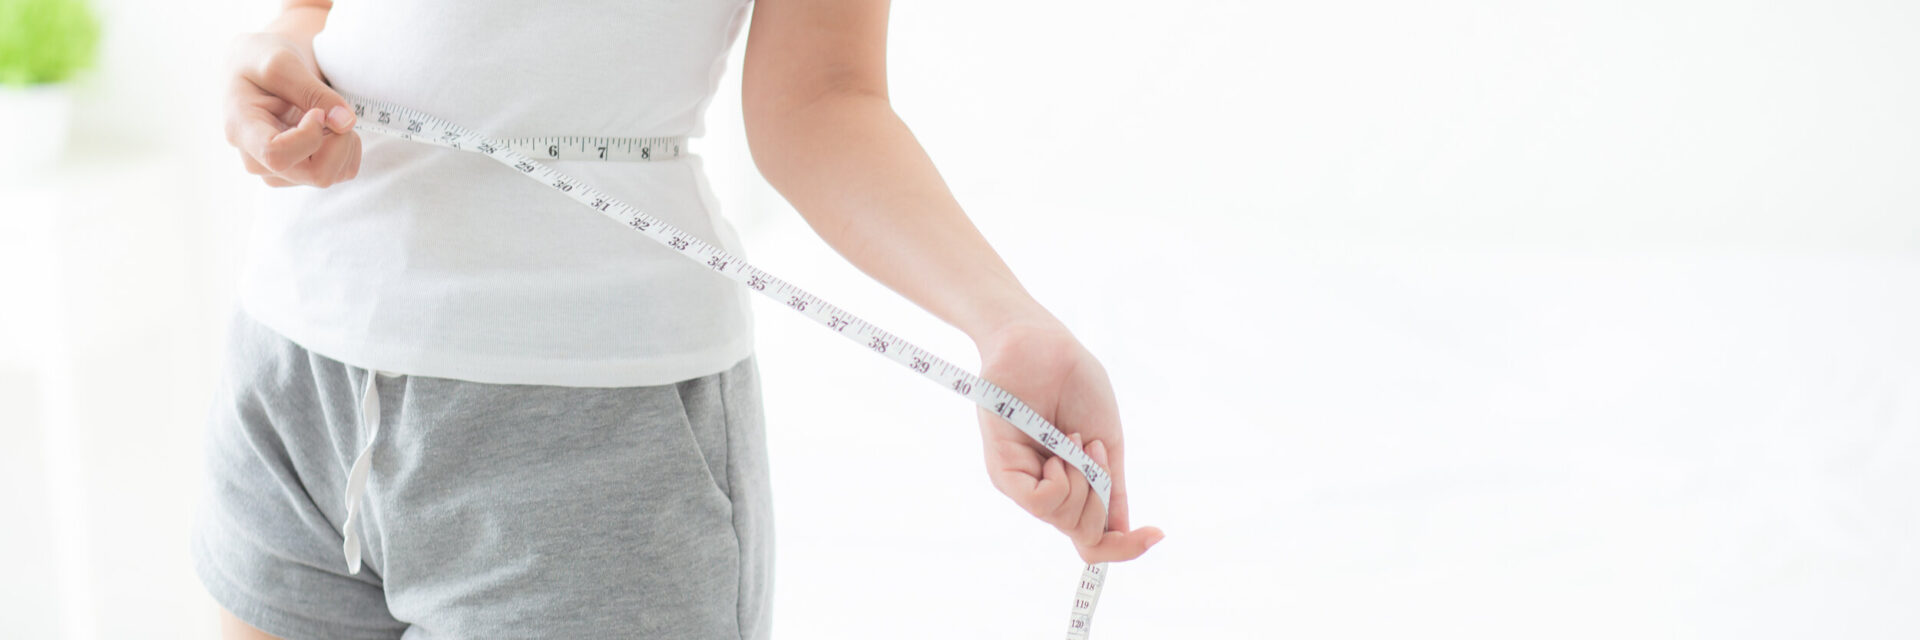 Intravenous Weight Loss